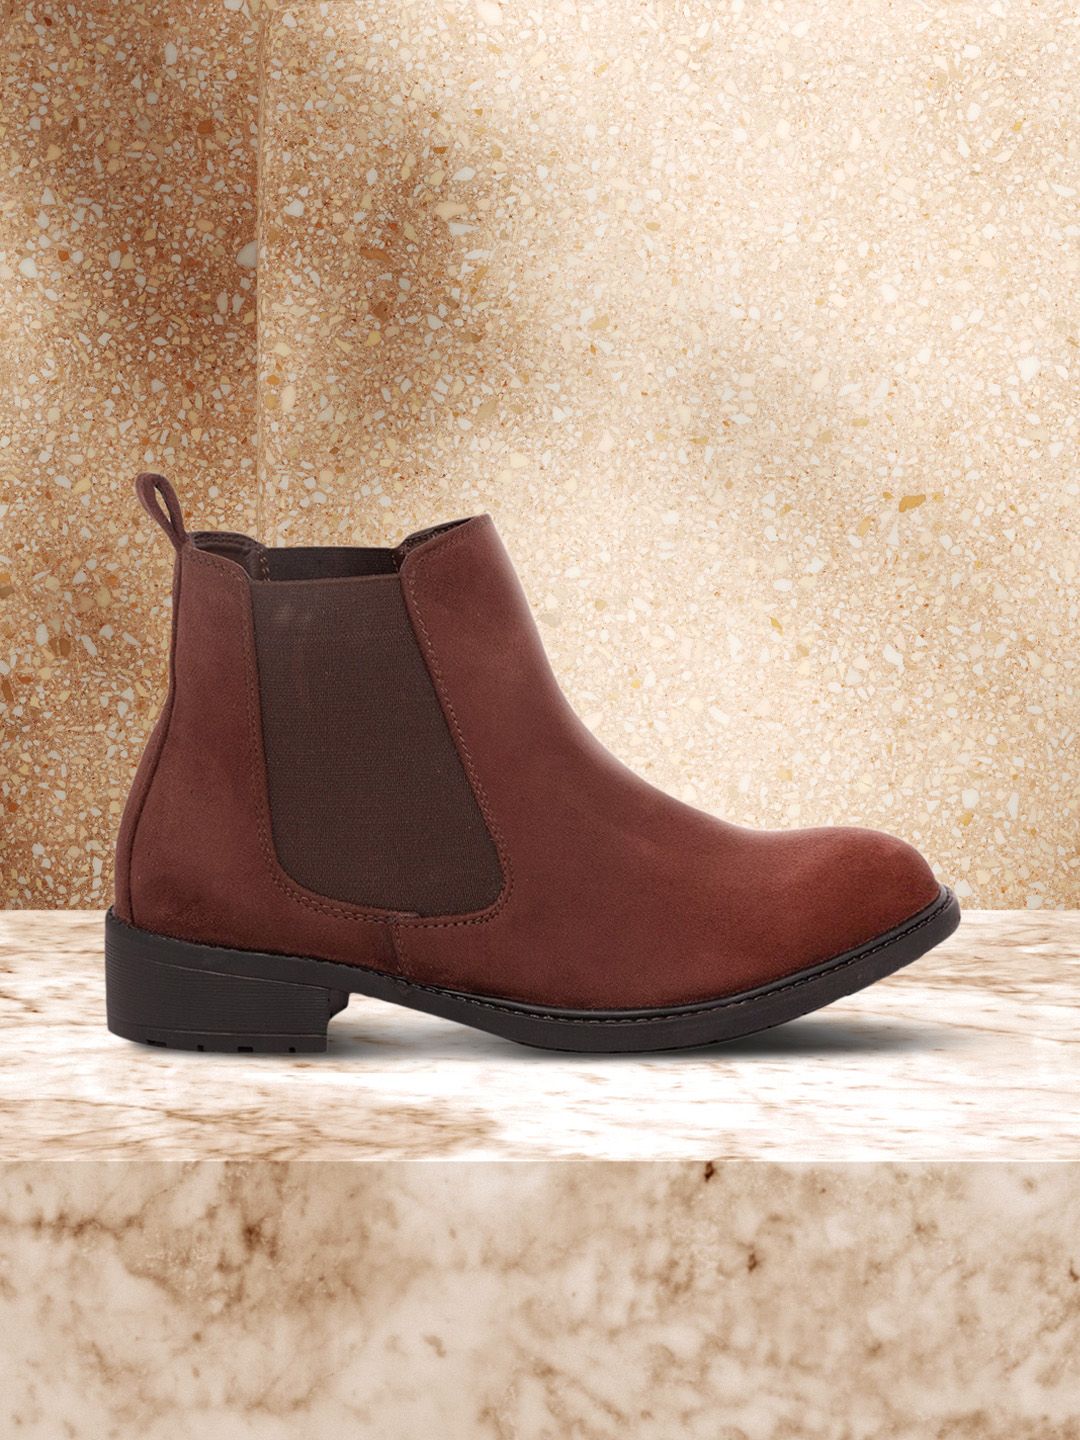 Rocia Women Brown Solid Suede Heeled Boots Price in India